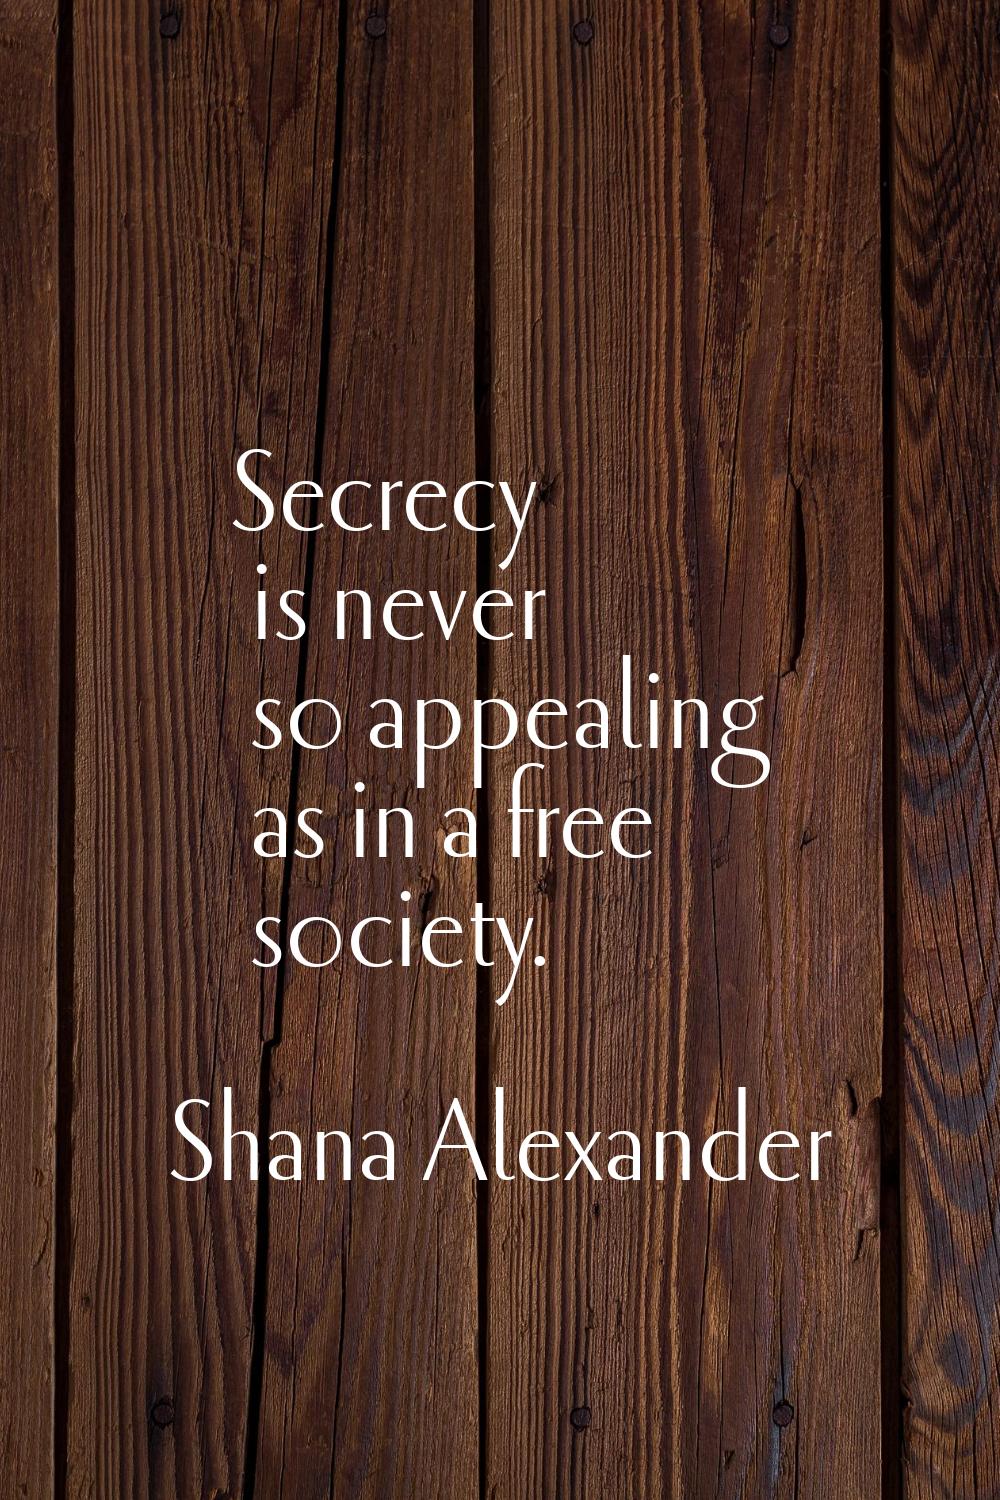 Secrecy is never so appealing as in a free society.